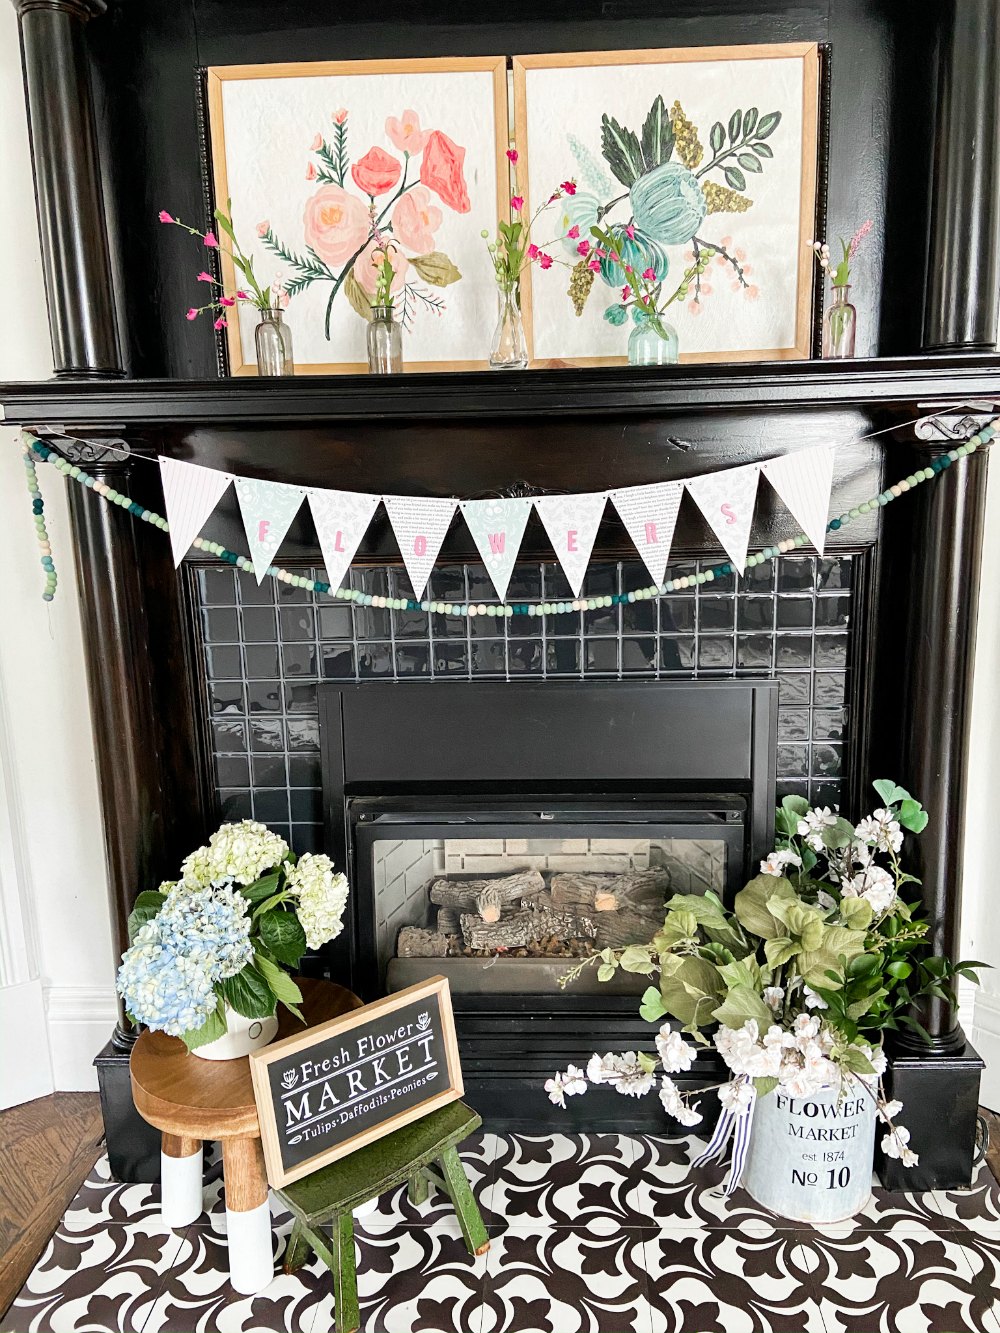 Simple Spring Flower Mantel. Colorful flower art, sweet vases of flowers and a handmade banner are easy to put together to bring some Spring sunshine to your mantel.